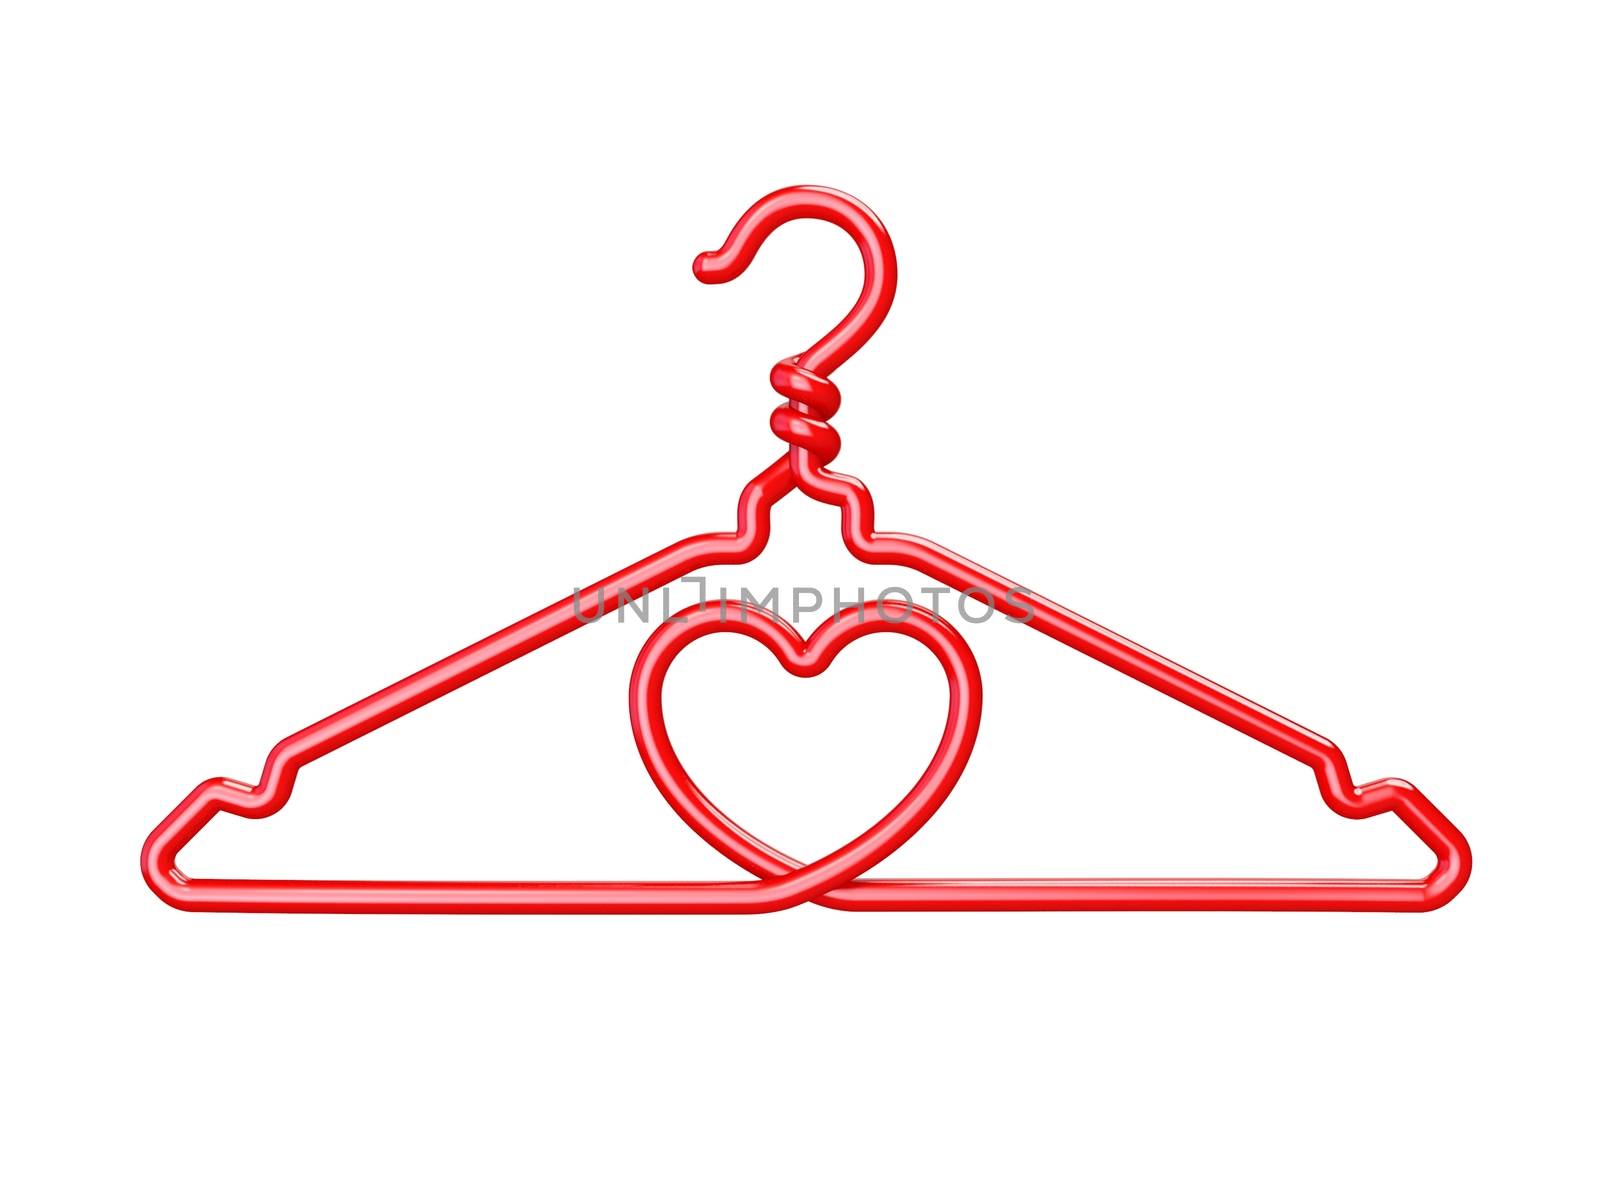 Red wire clothes hangers heart shaped 3D render illustration isolated on white background.